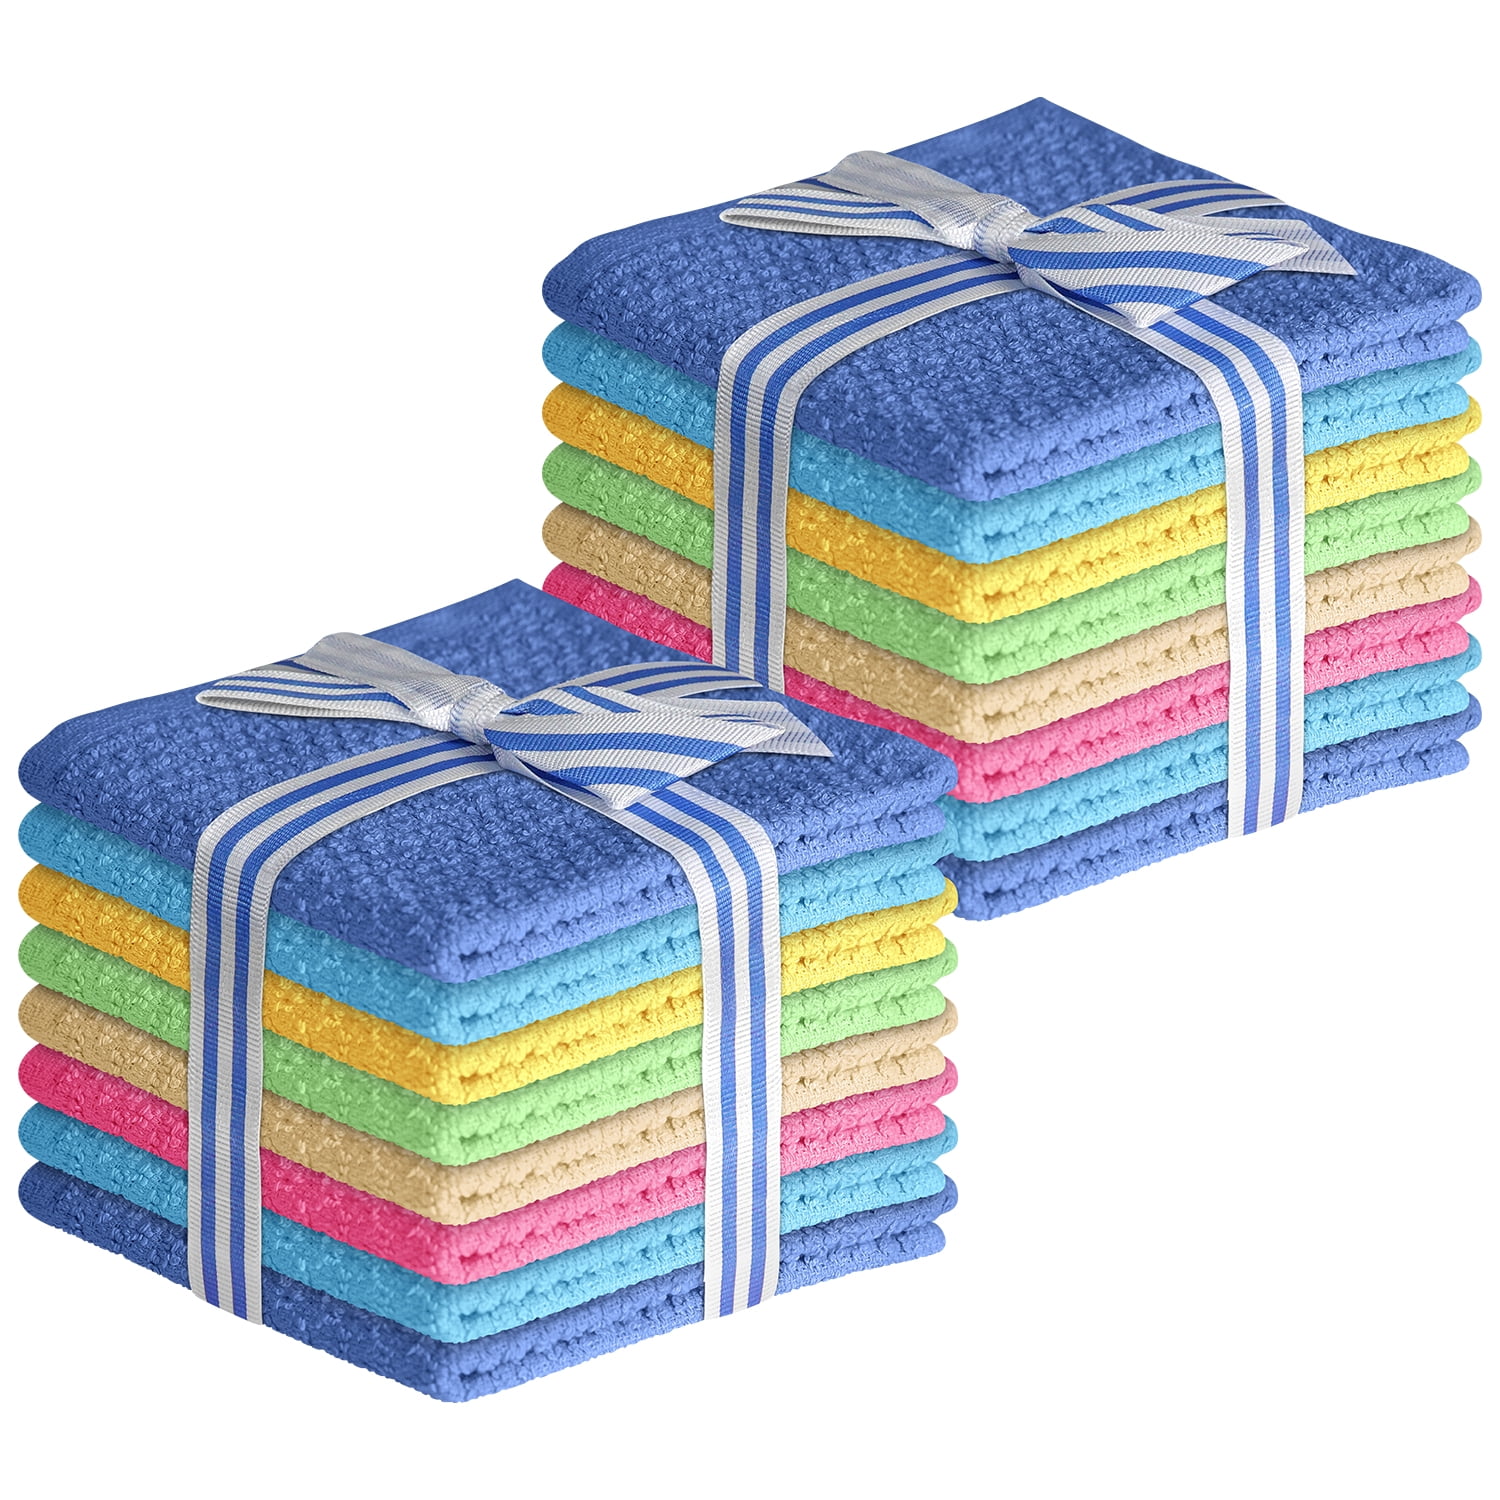 100% Cotton Dish Cloth Wash Cloth Hand Towel Set of 8 or 16 Kitchen  Bathroom Linens Cleaning, 1 unit - King Soopers